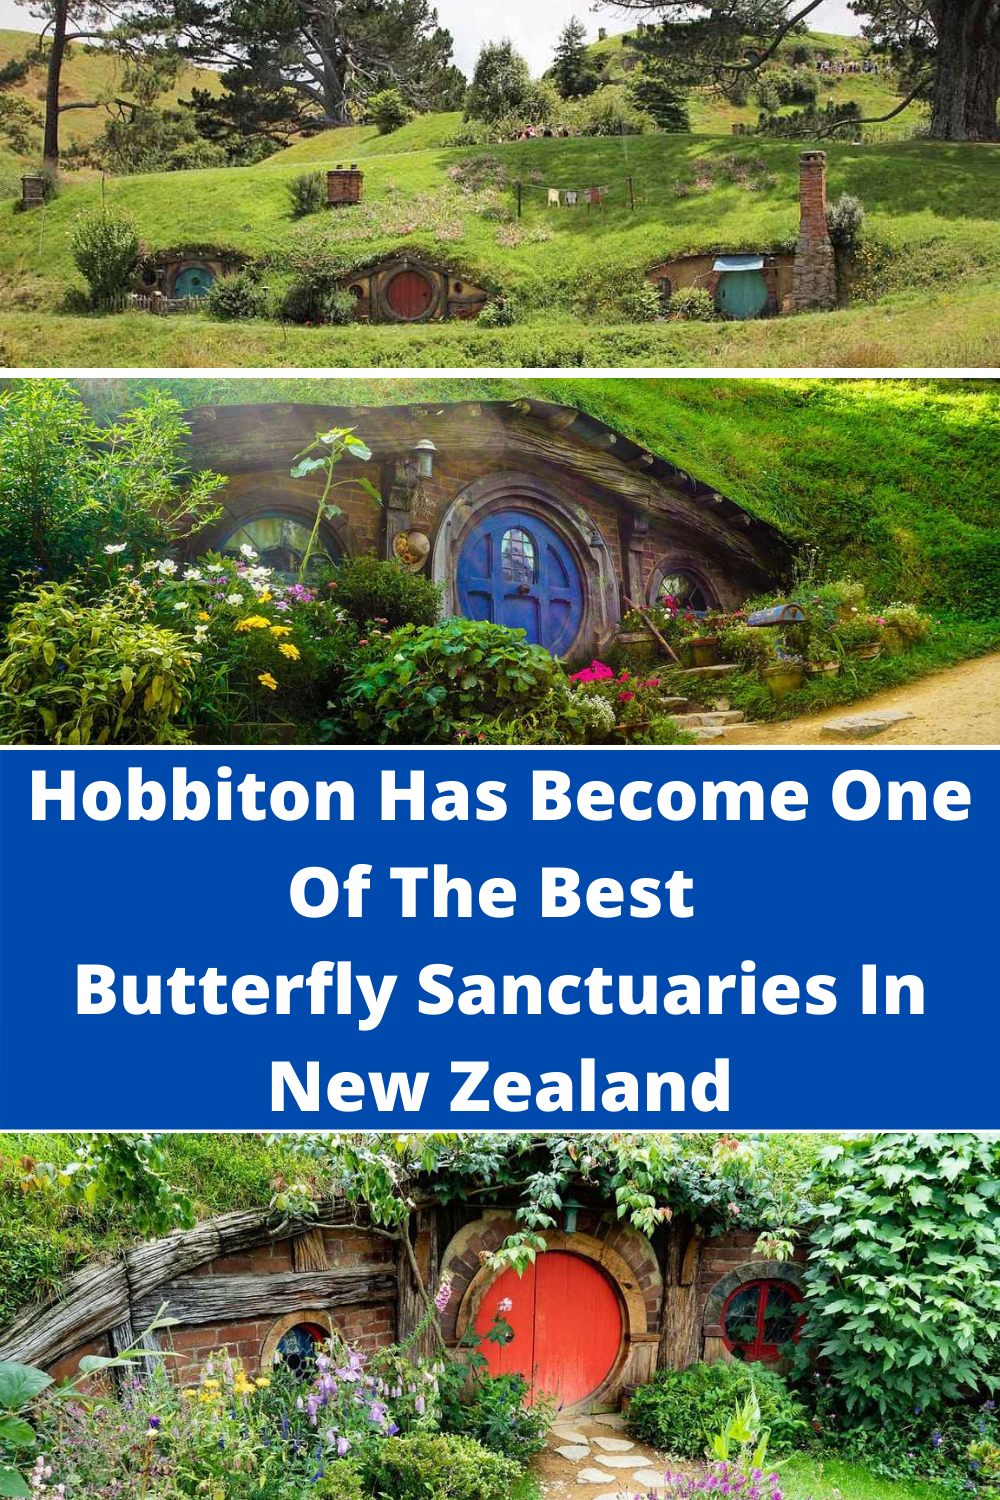 Hobbiton has become one of the best butterfly sanctuaries in New Zealand